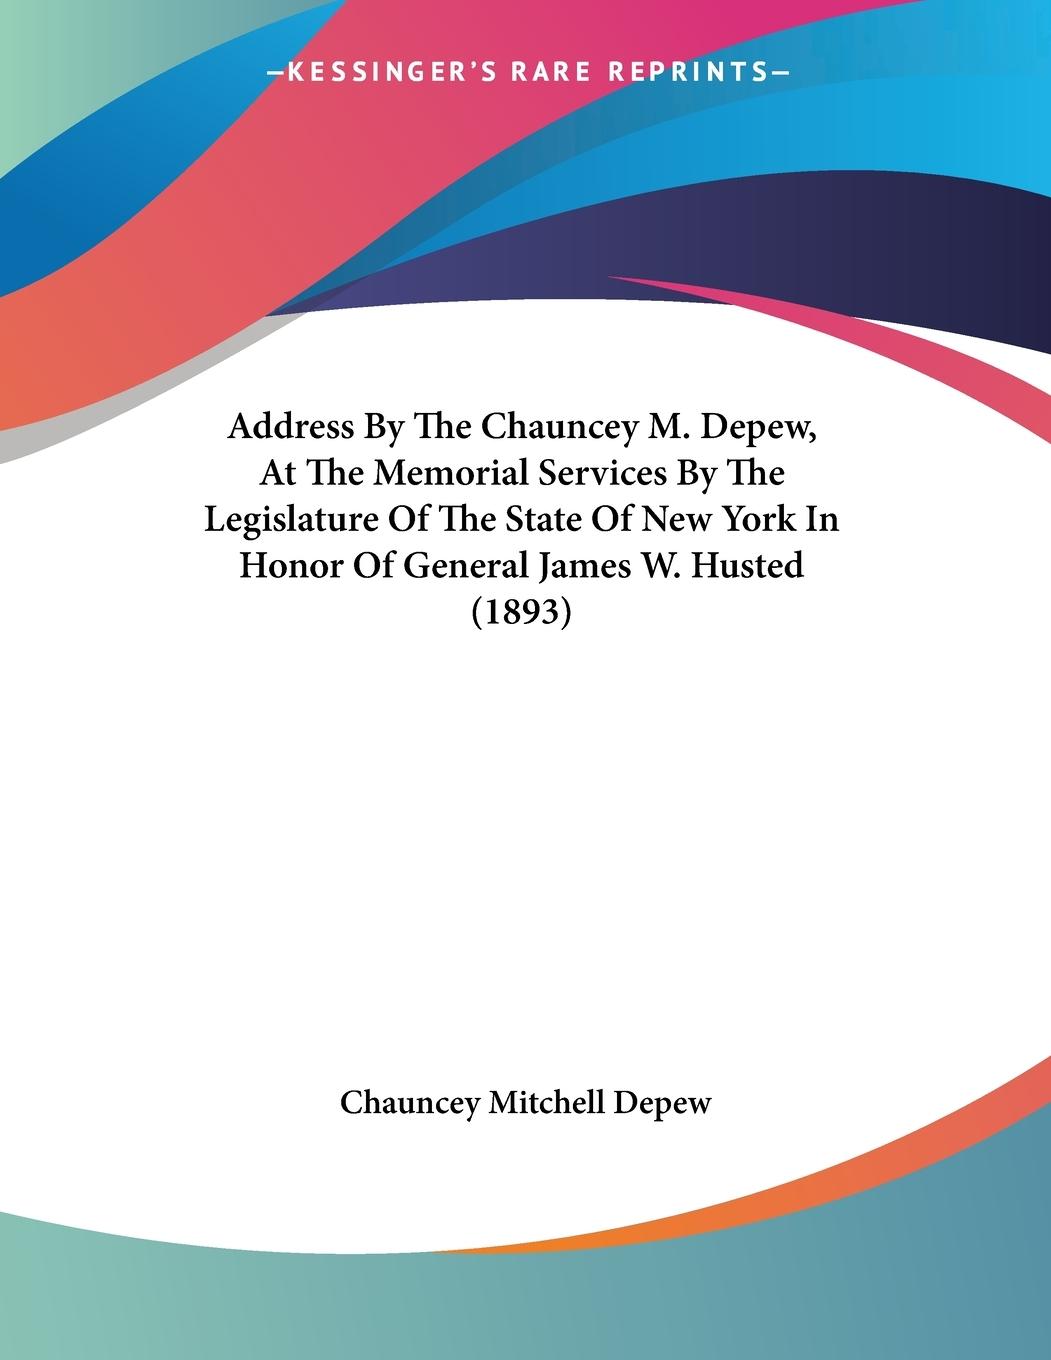 Address By The Chauncey M. Depew, At The Memorial Services By The Legislature Of The State Of New York In Honor Of General James W. Husted (1893) - Depew, Chauncey Mitchell